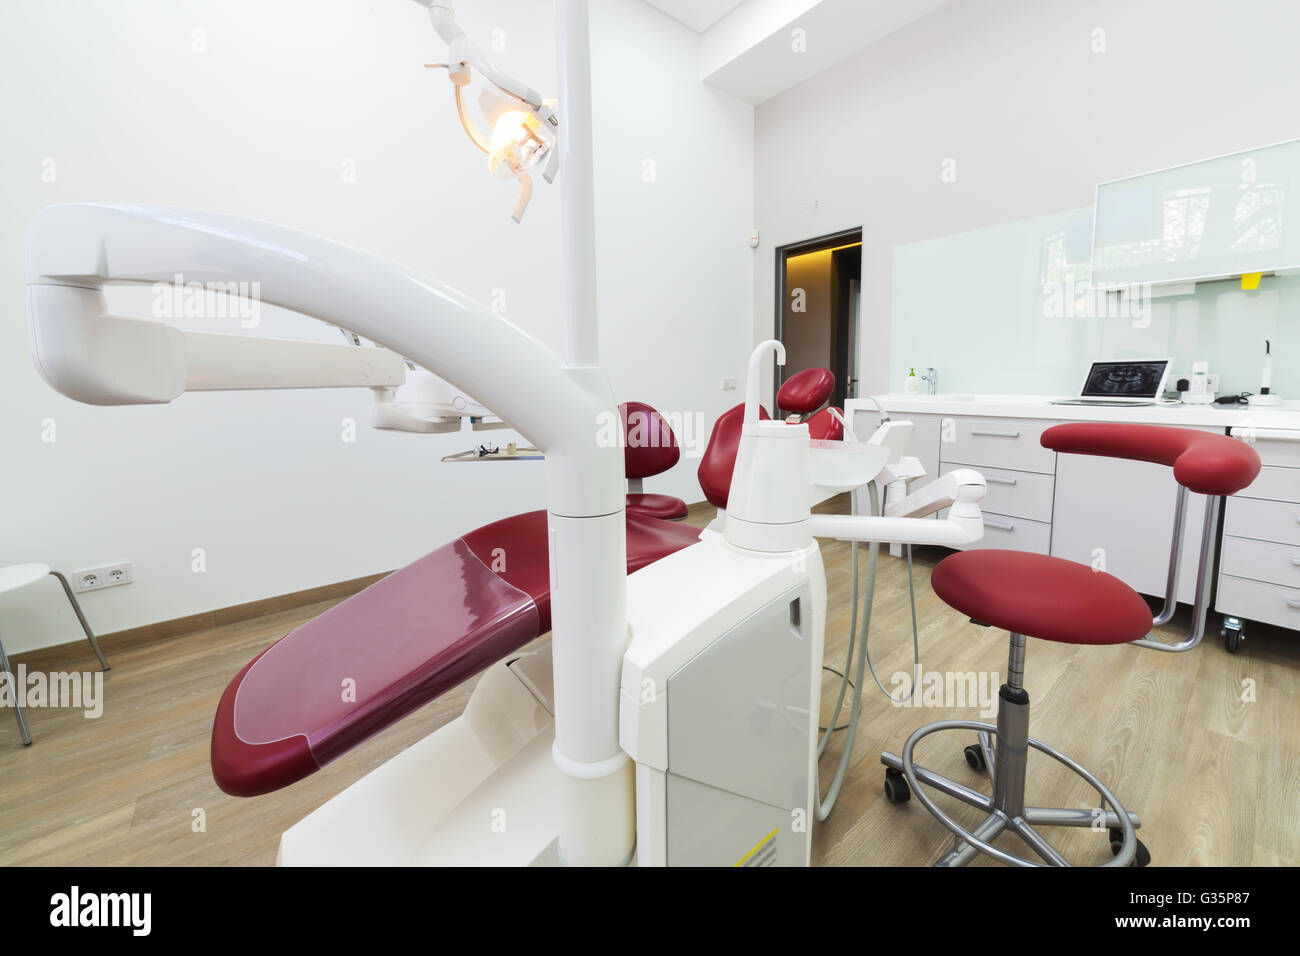 This is Interior of modern dental clinic. Stock Photo